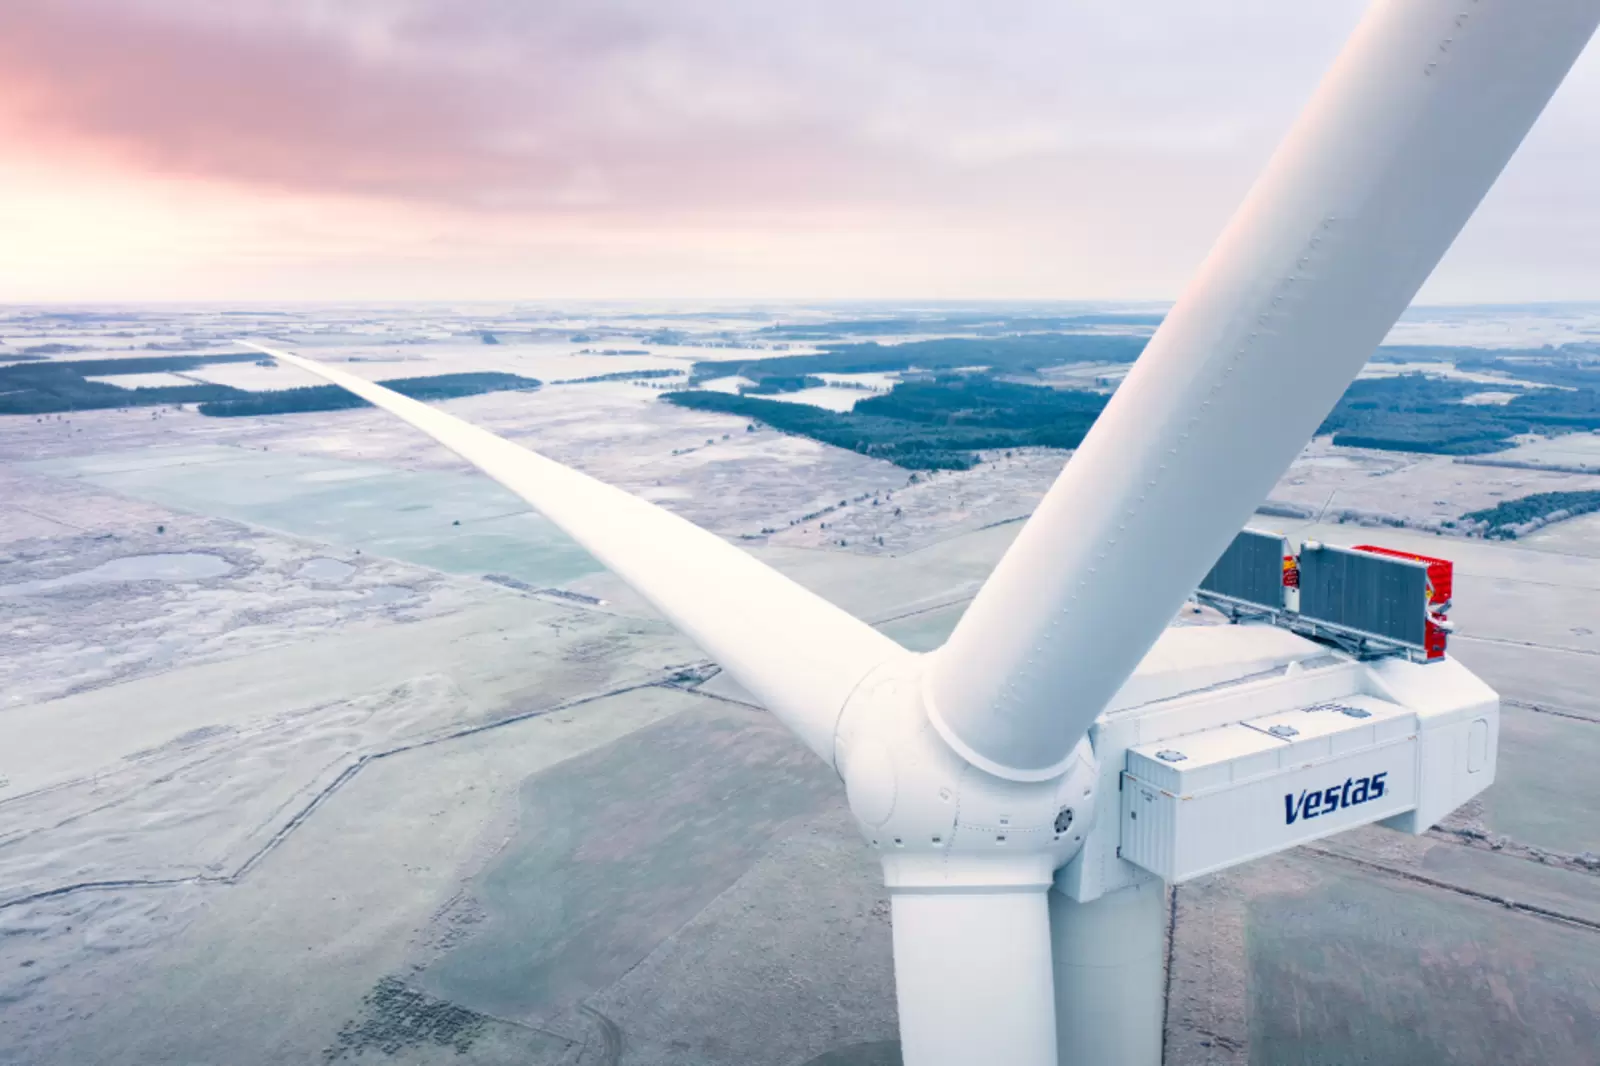 Denmark's energy policy : built on renewables, driven by wind